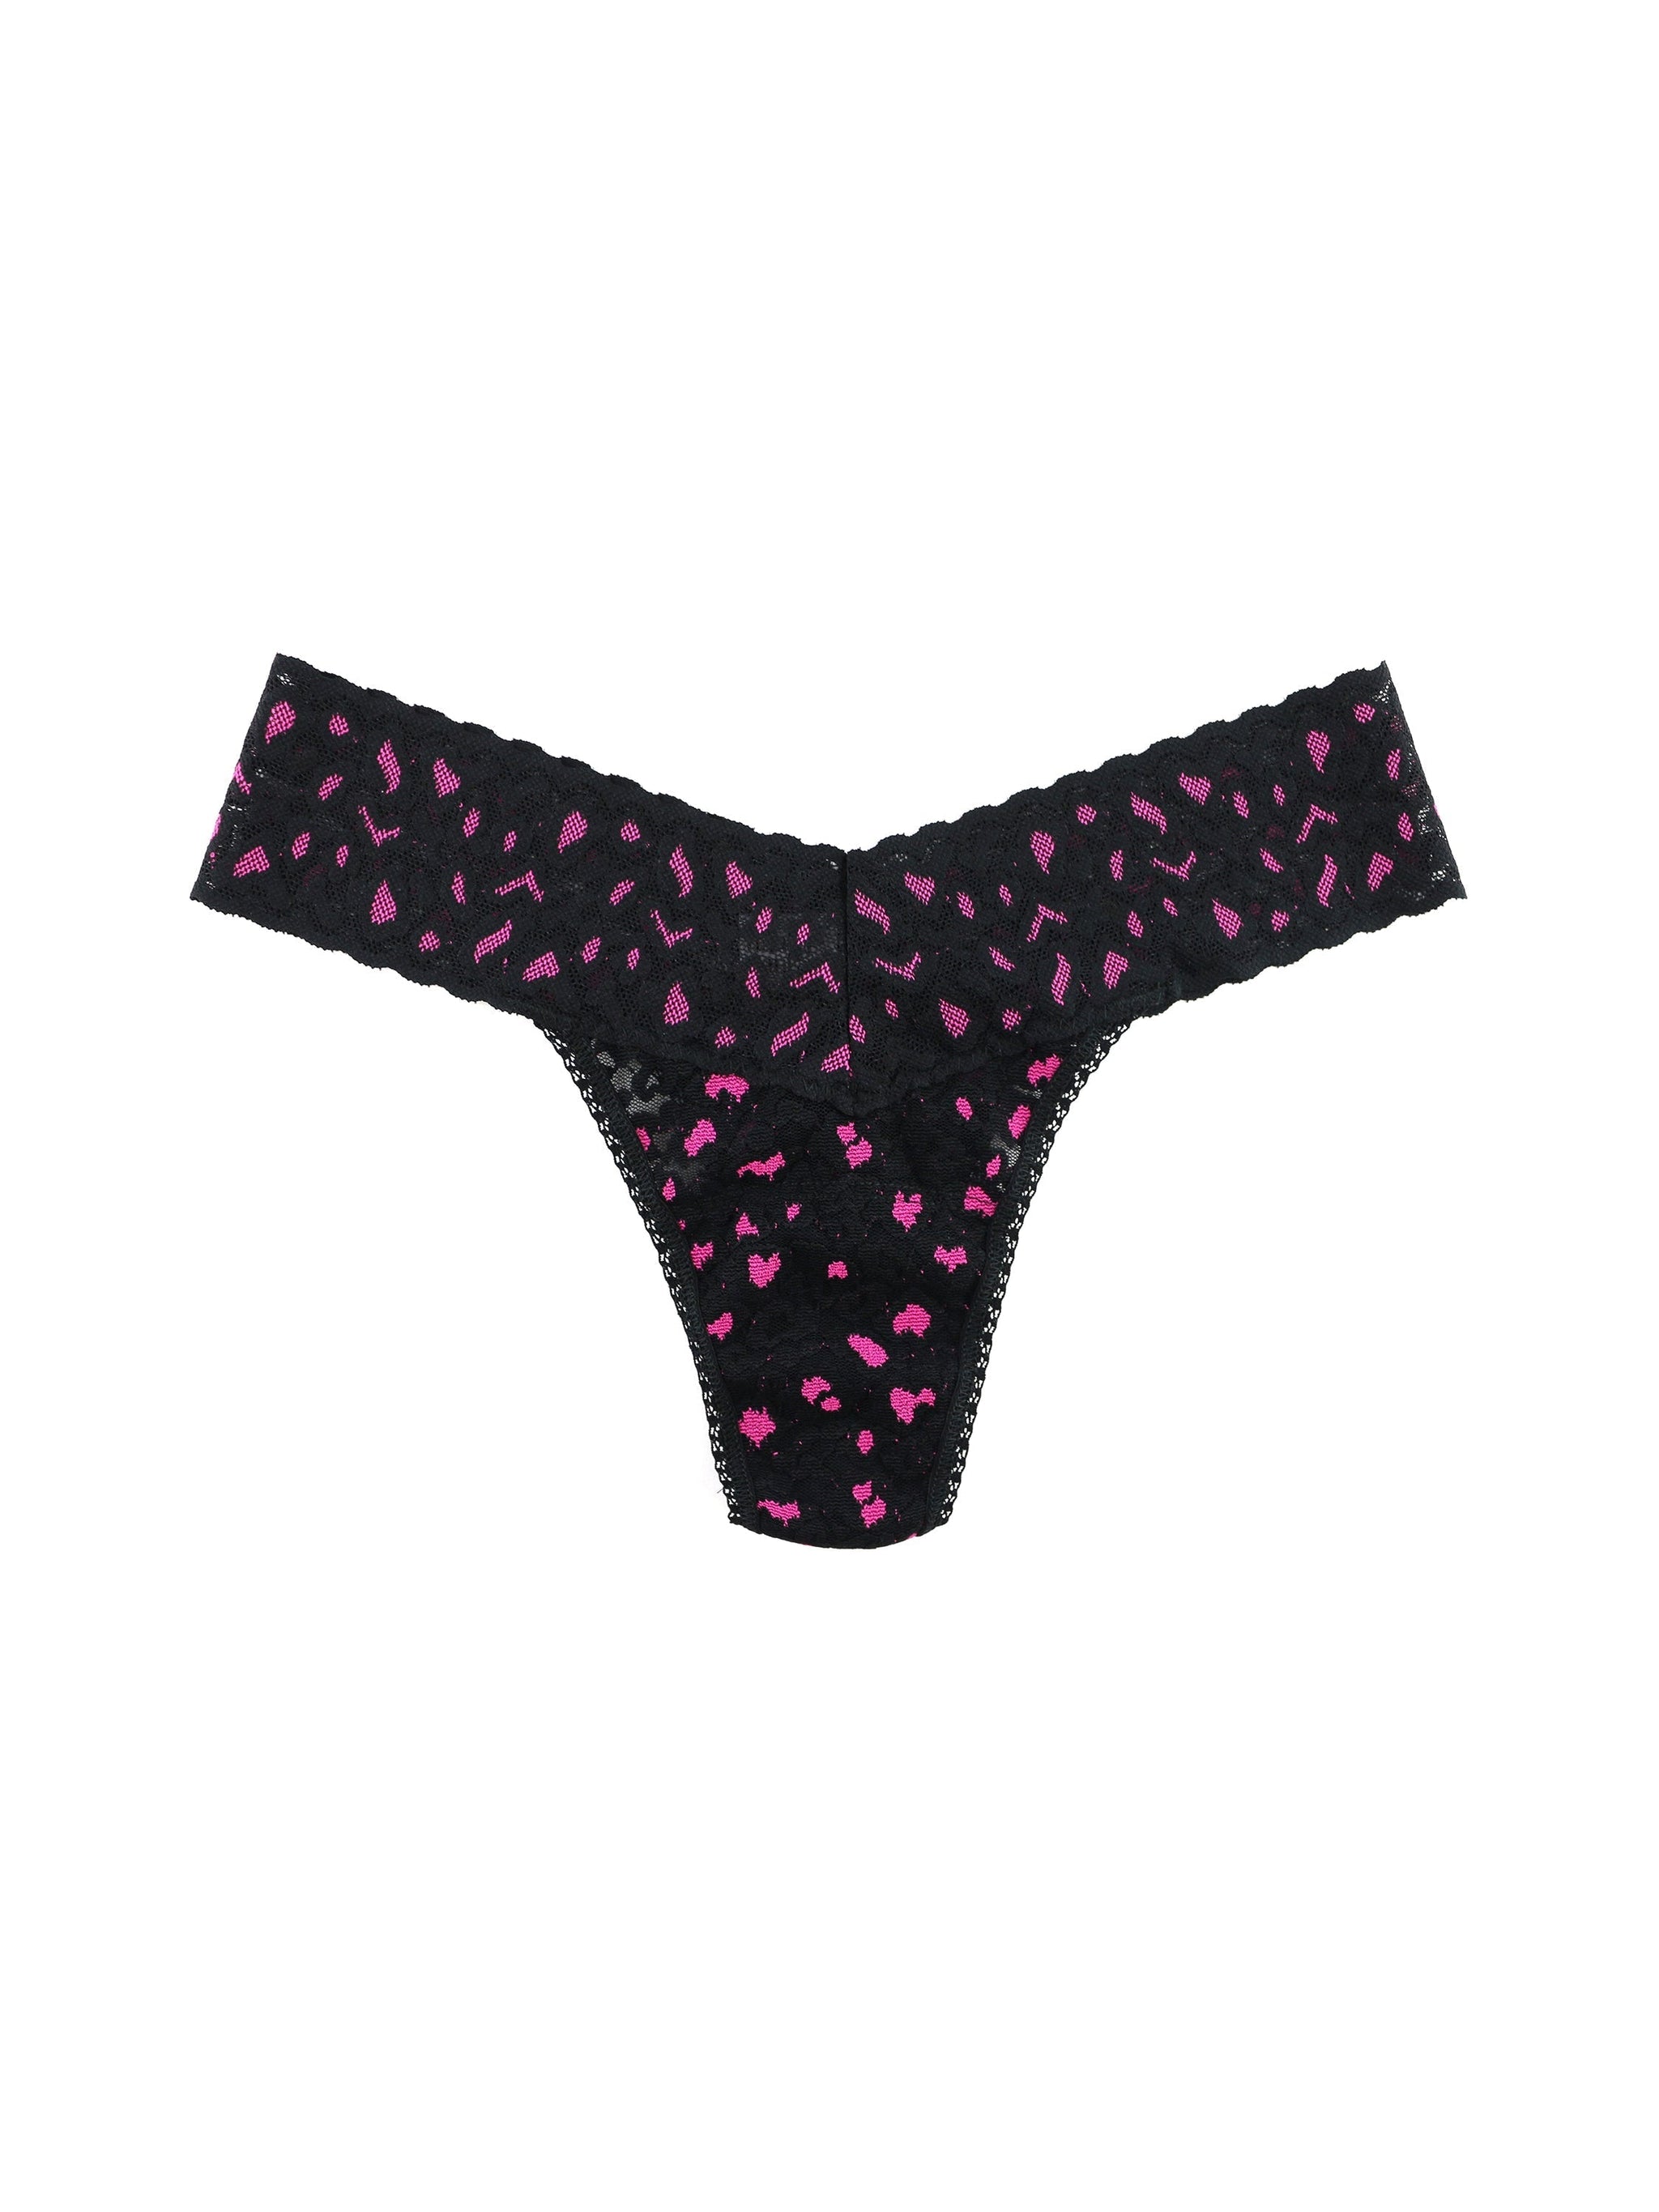 Cross Dyed Leopard Petite Low Rise Thong Black/Tulip Pink Sale